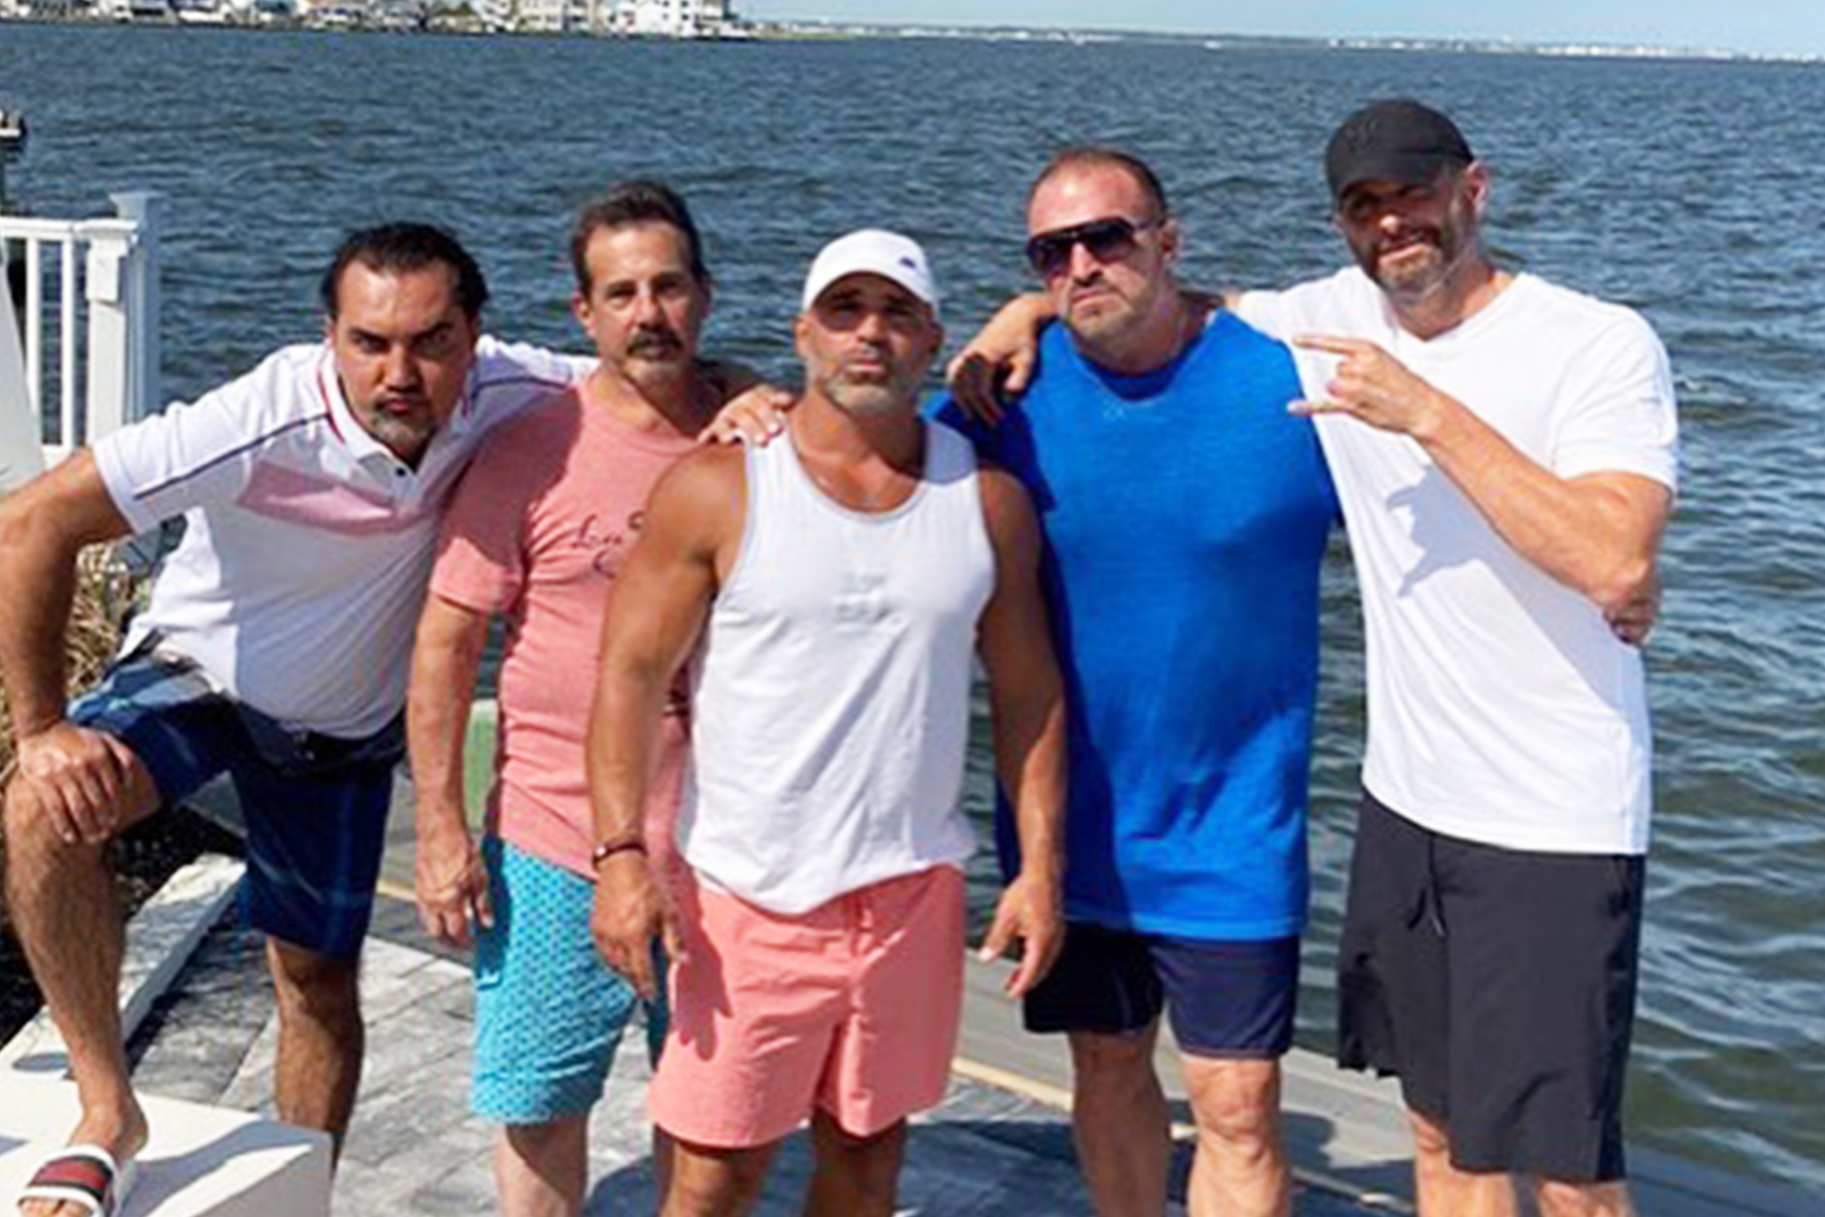 The Real Housewives Of New Jersey Husbands Reveal Their Taglines